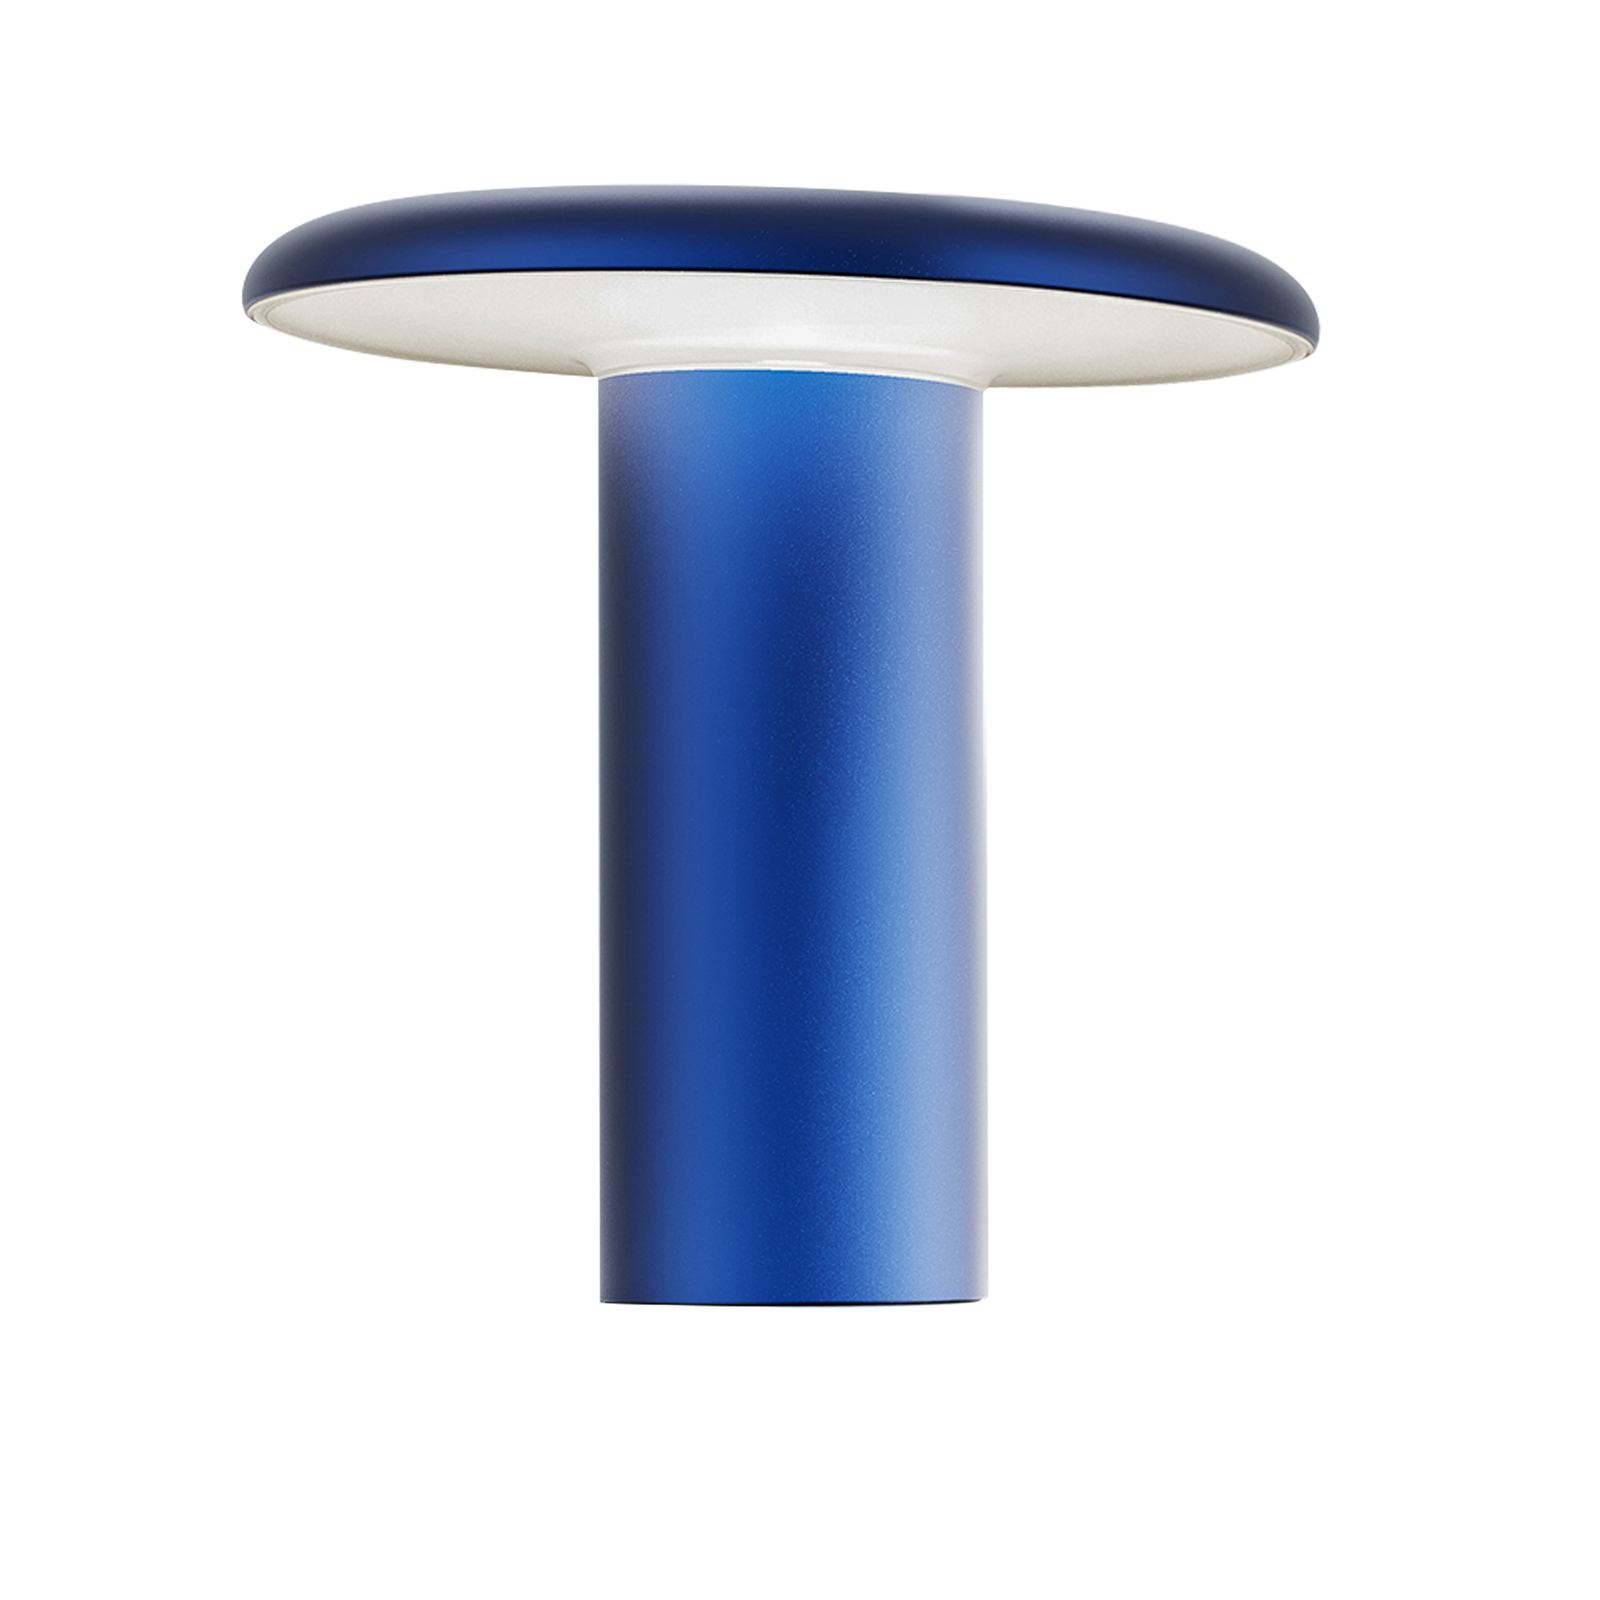 Artemide Takku LED table lamp with rechargeable battery, blue